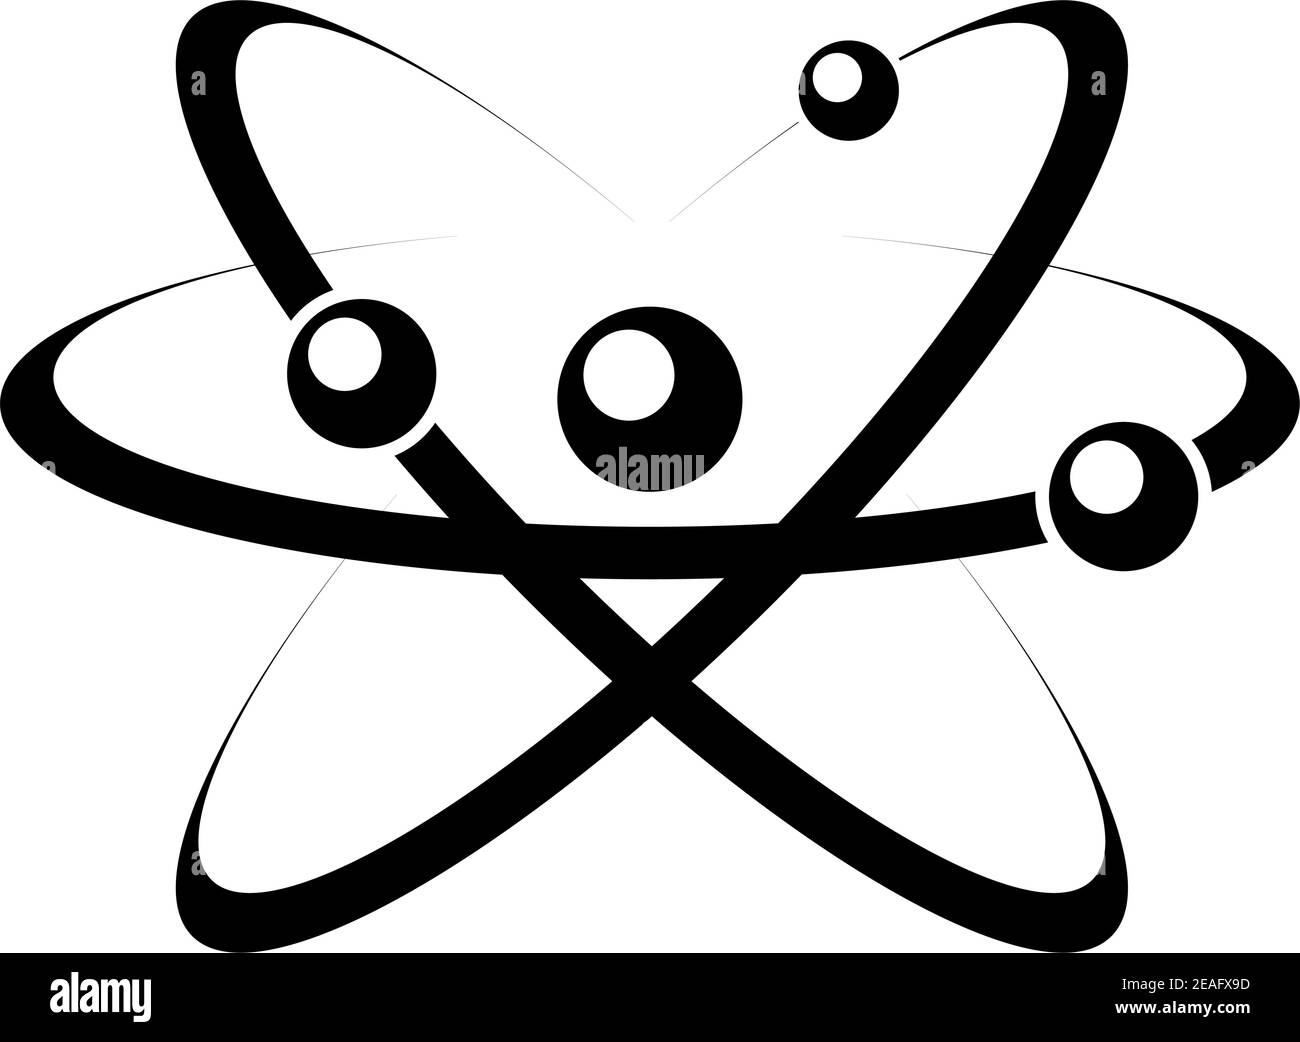 Black and white illustration of an atom with nucleus, proton, neutron and electron, isolated on white background Stock Vector